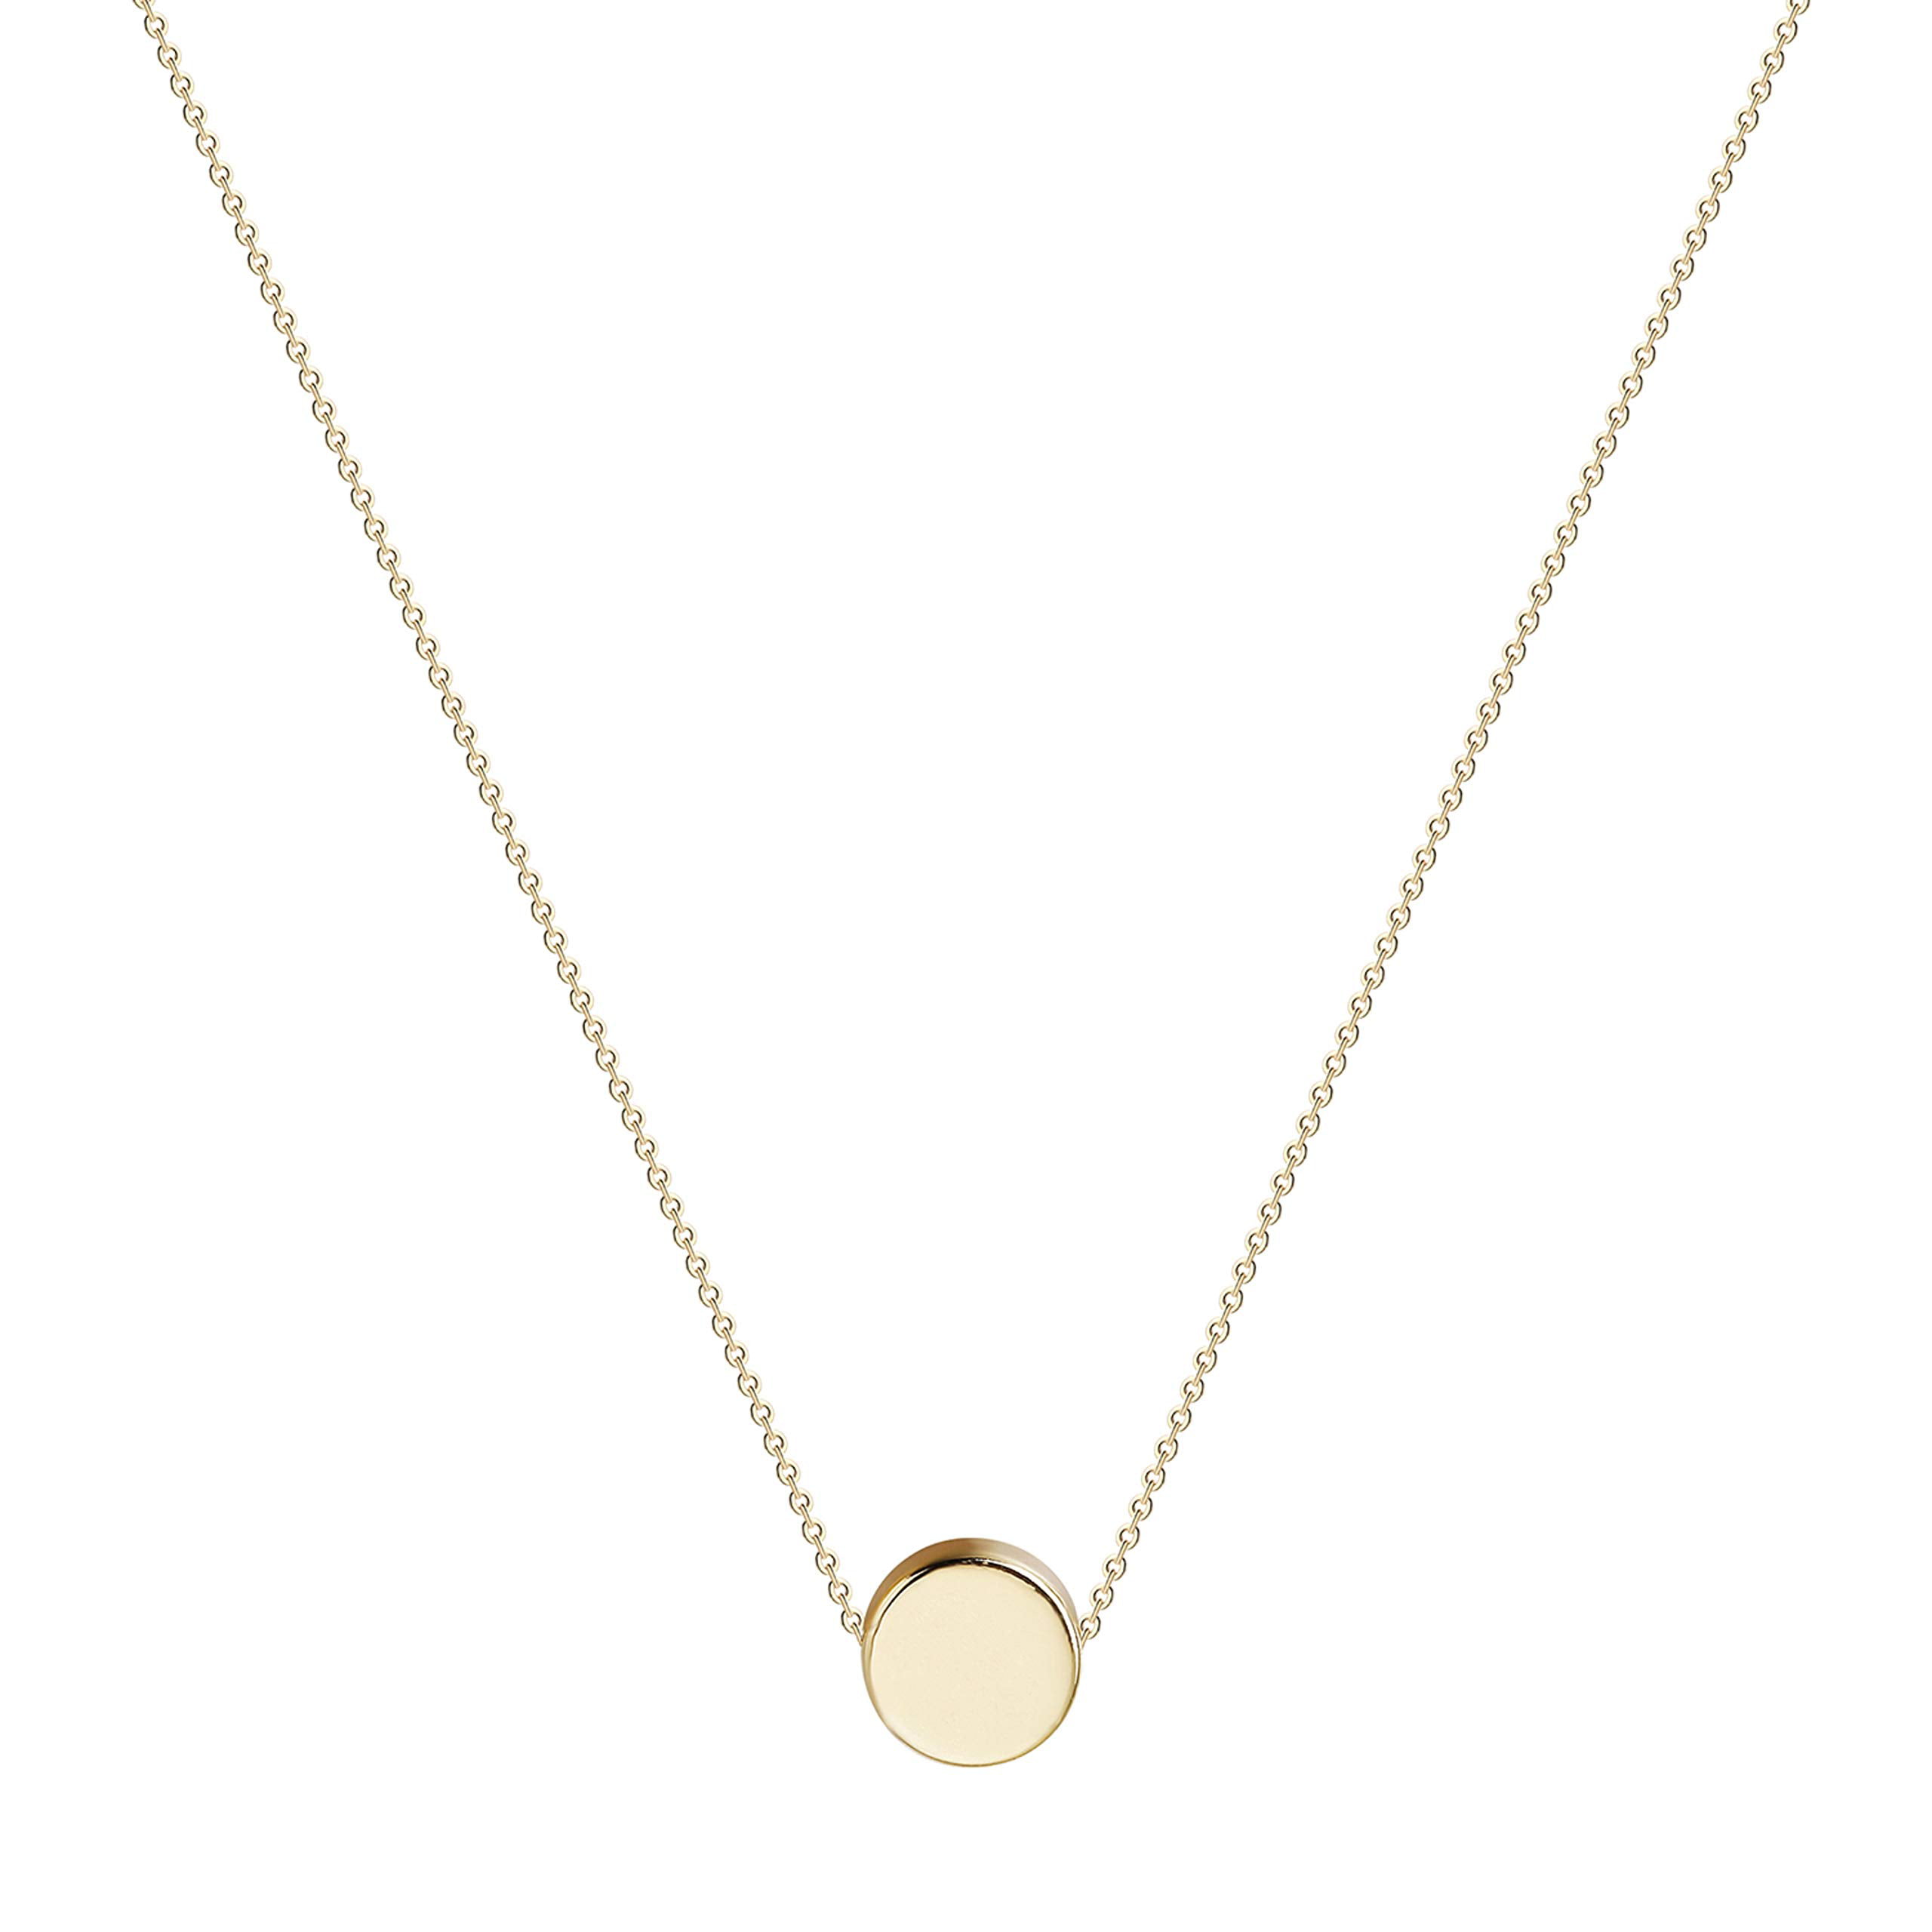 Details about   14K Solid Yellow Gold Mini Key Cut Out Dainty Necklace 16-18" Adjust Minimalist